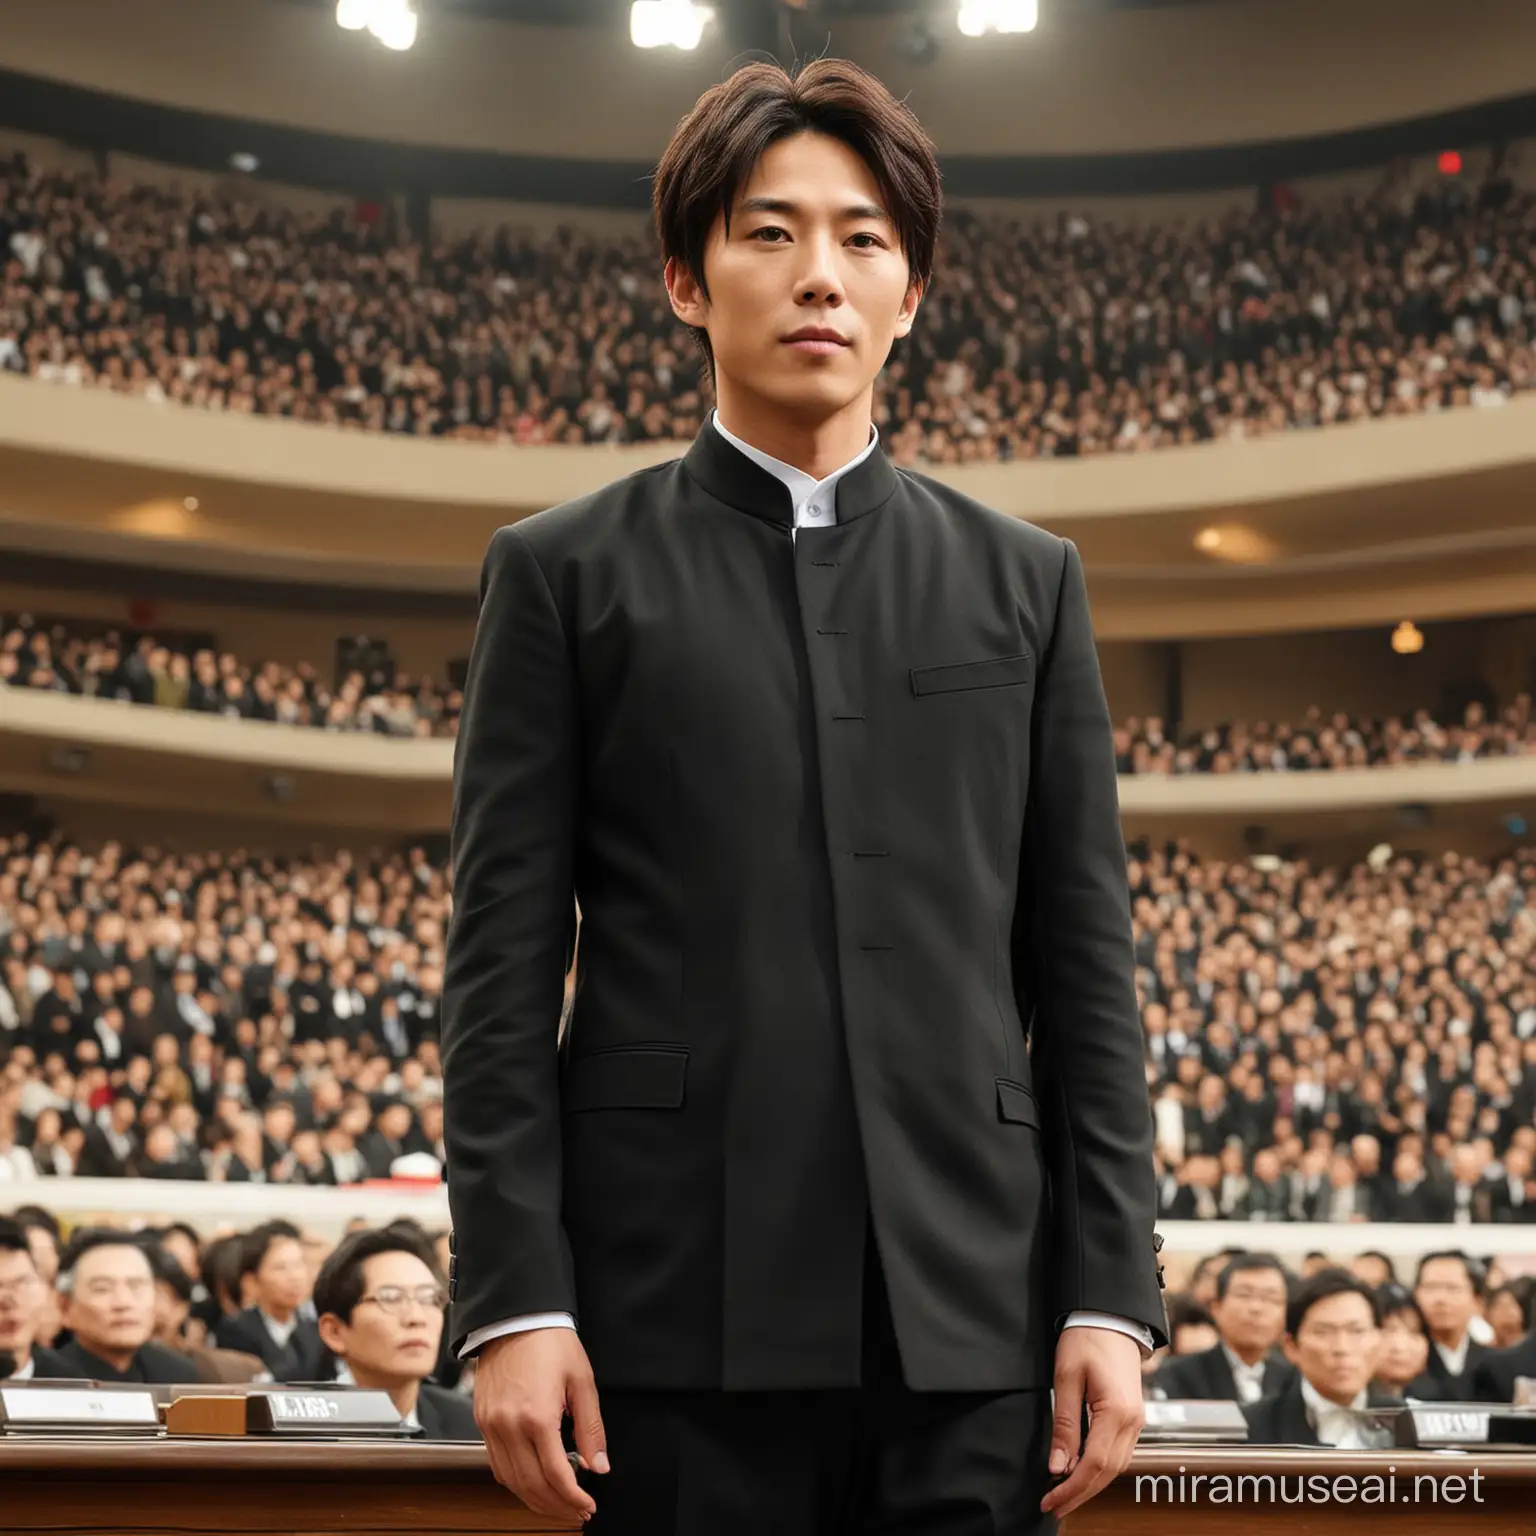 takeru sato young handsome japanese actor wearing a black mao suit in the worker's party congress hall